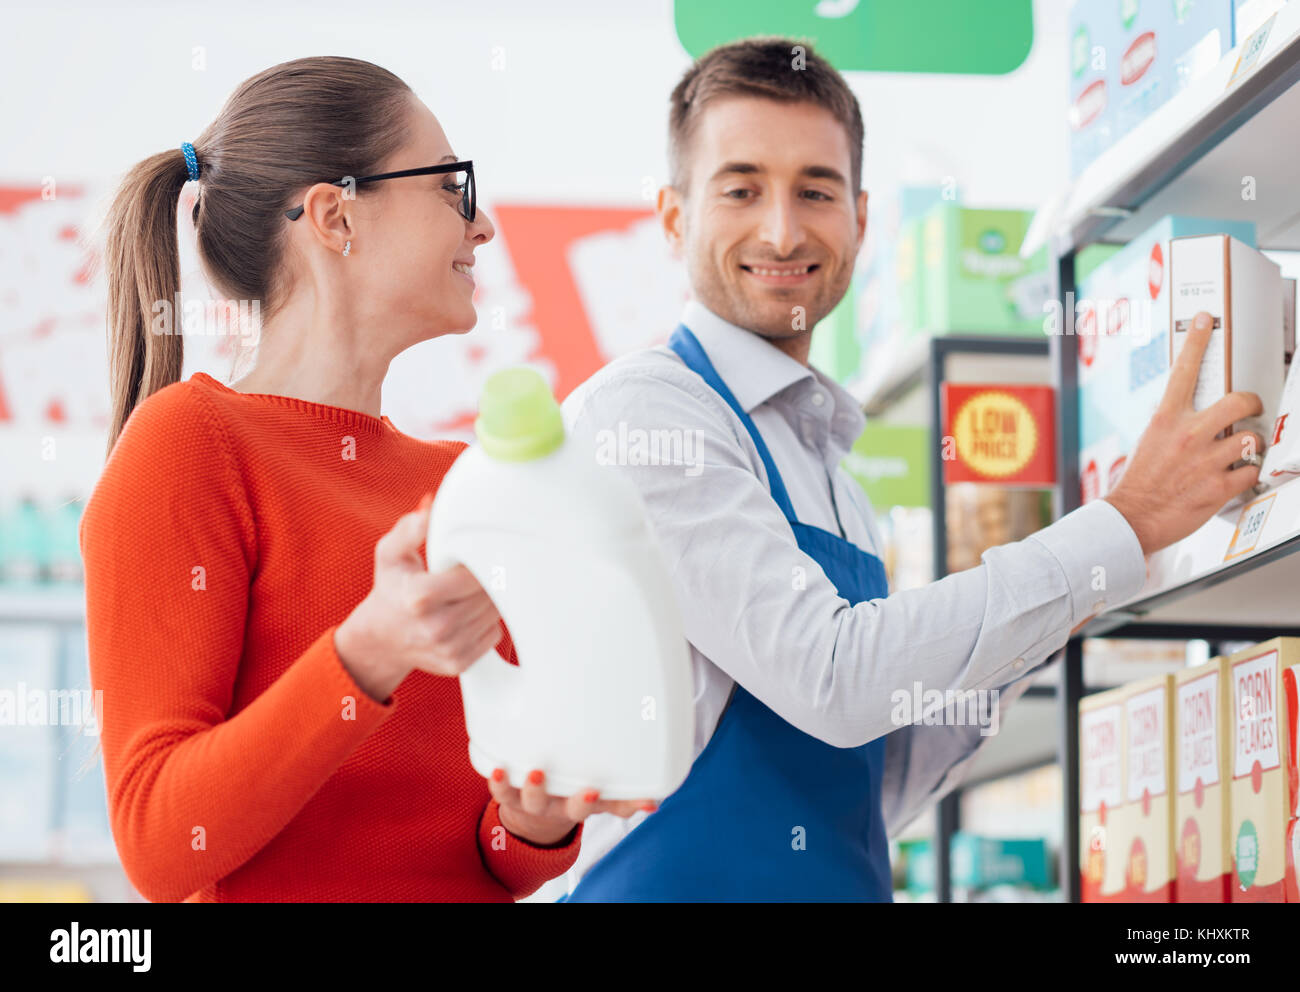 Professional supermarket clerk helping a customer, she is showing him a laundry detergent product Stock Photo